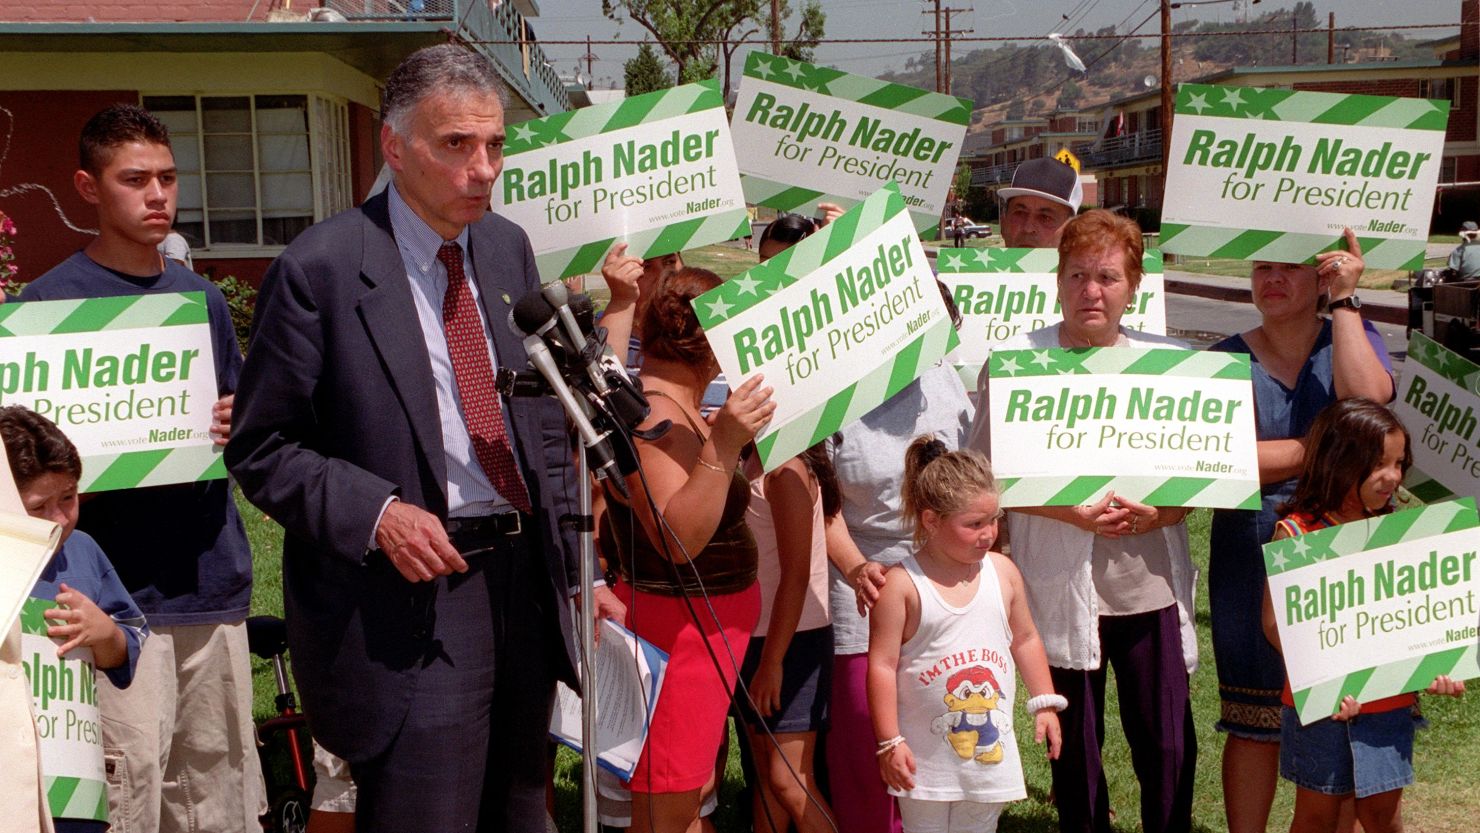 U.S. Green Party presidential candidate Ralph Nader attends a conference on June 26, 2000 In Los Angeles, California. Nader ran on the slogan "Government Of, By, and For the People...Not the Monied Interests."